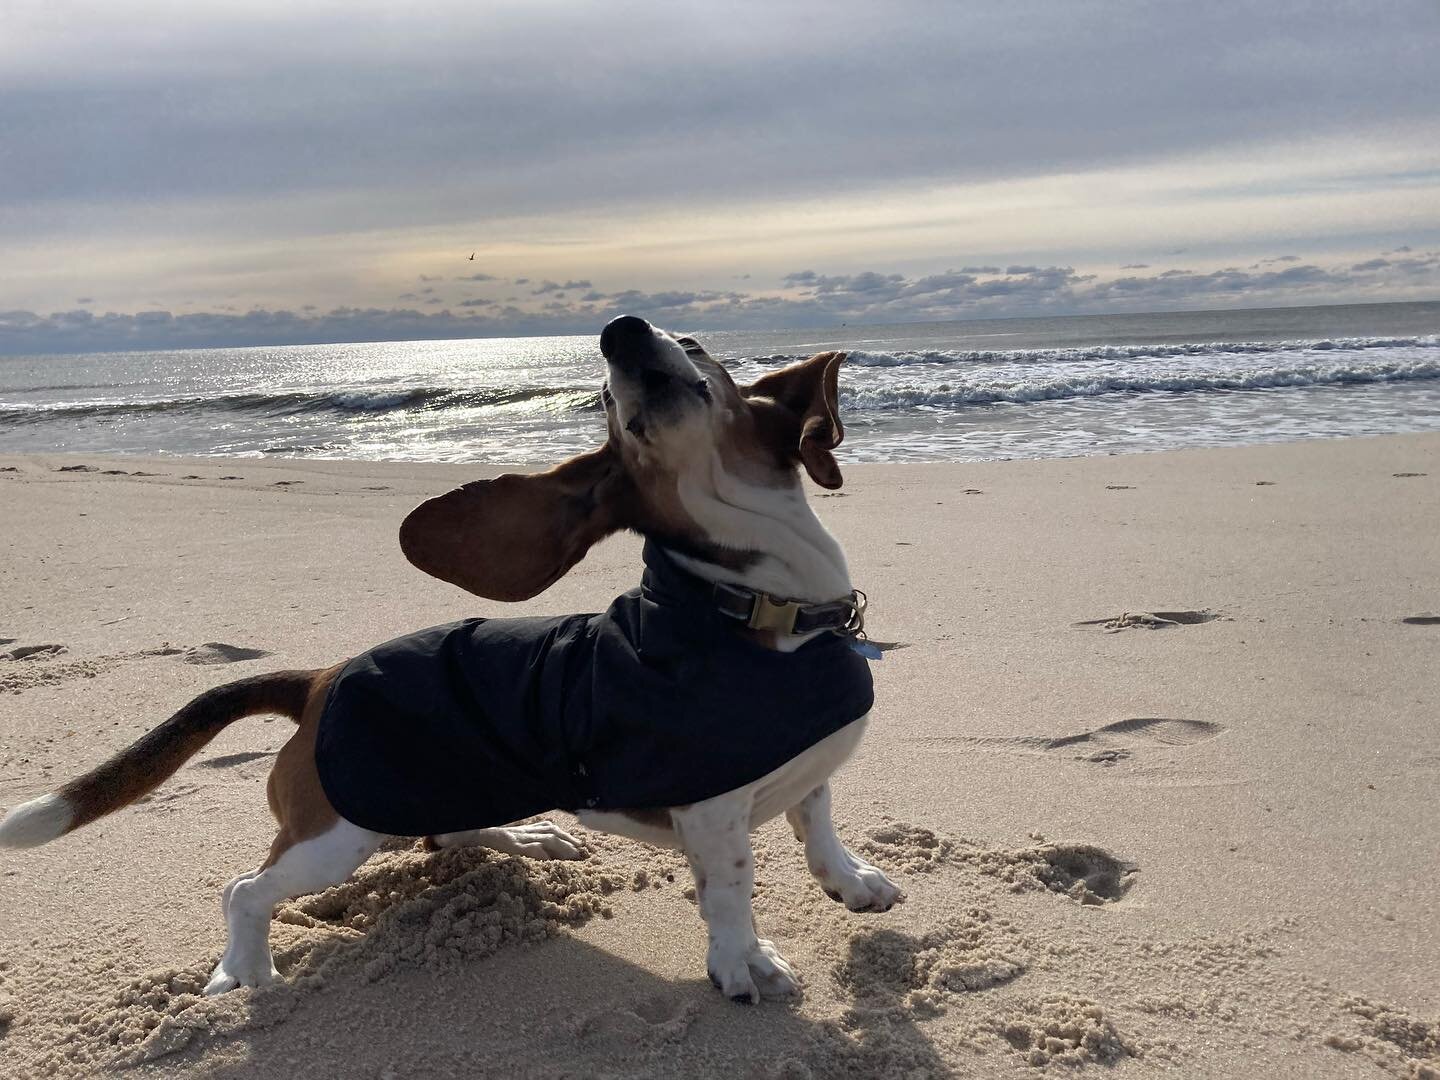 Baby it&rsquo;s cold 🥶 outside&hellip; nothing stops the DNB pack. #dogwalkingservices #womensbestfriend #dogsofinstagram #instadog #adoptdontshop #hamptonbeaches #southhamptonbeaches #cutedogsofinstagram #dogboarding #itsadogslife #lovemyjob #hampt